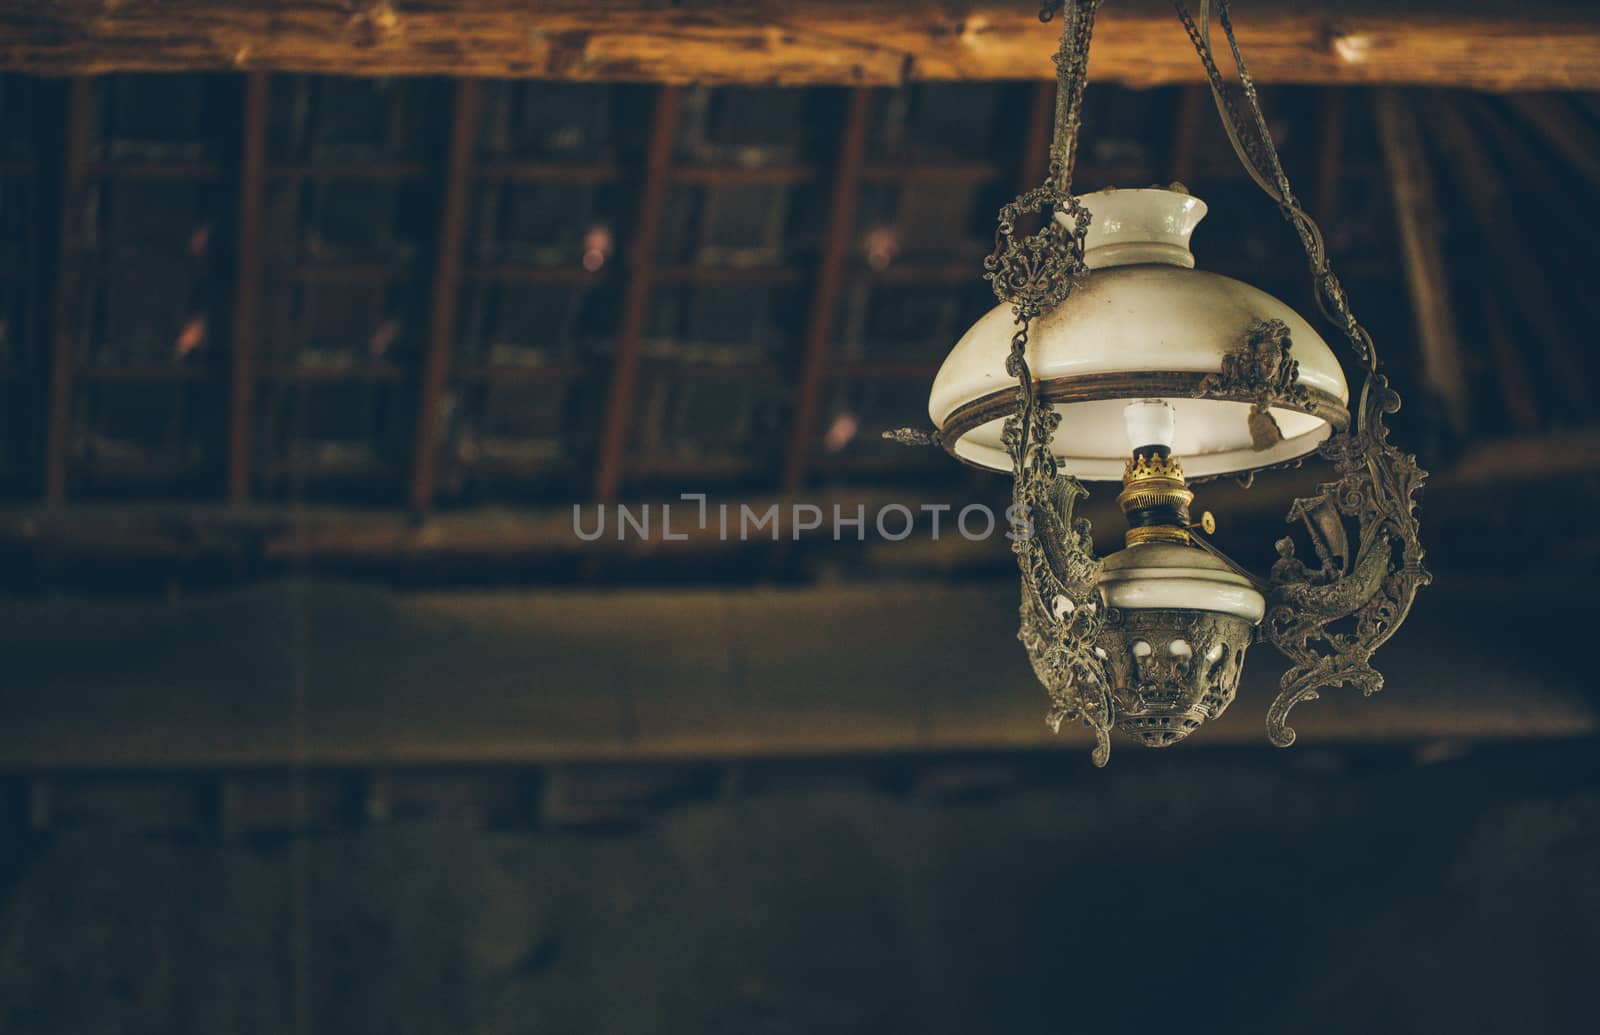 Old chandelier in bali, Indonesia